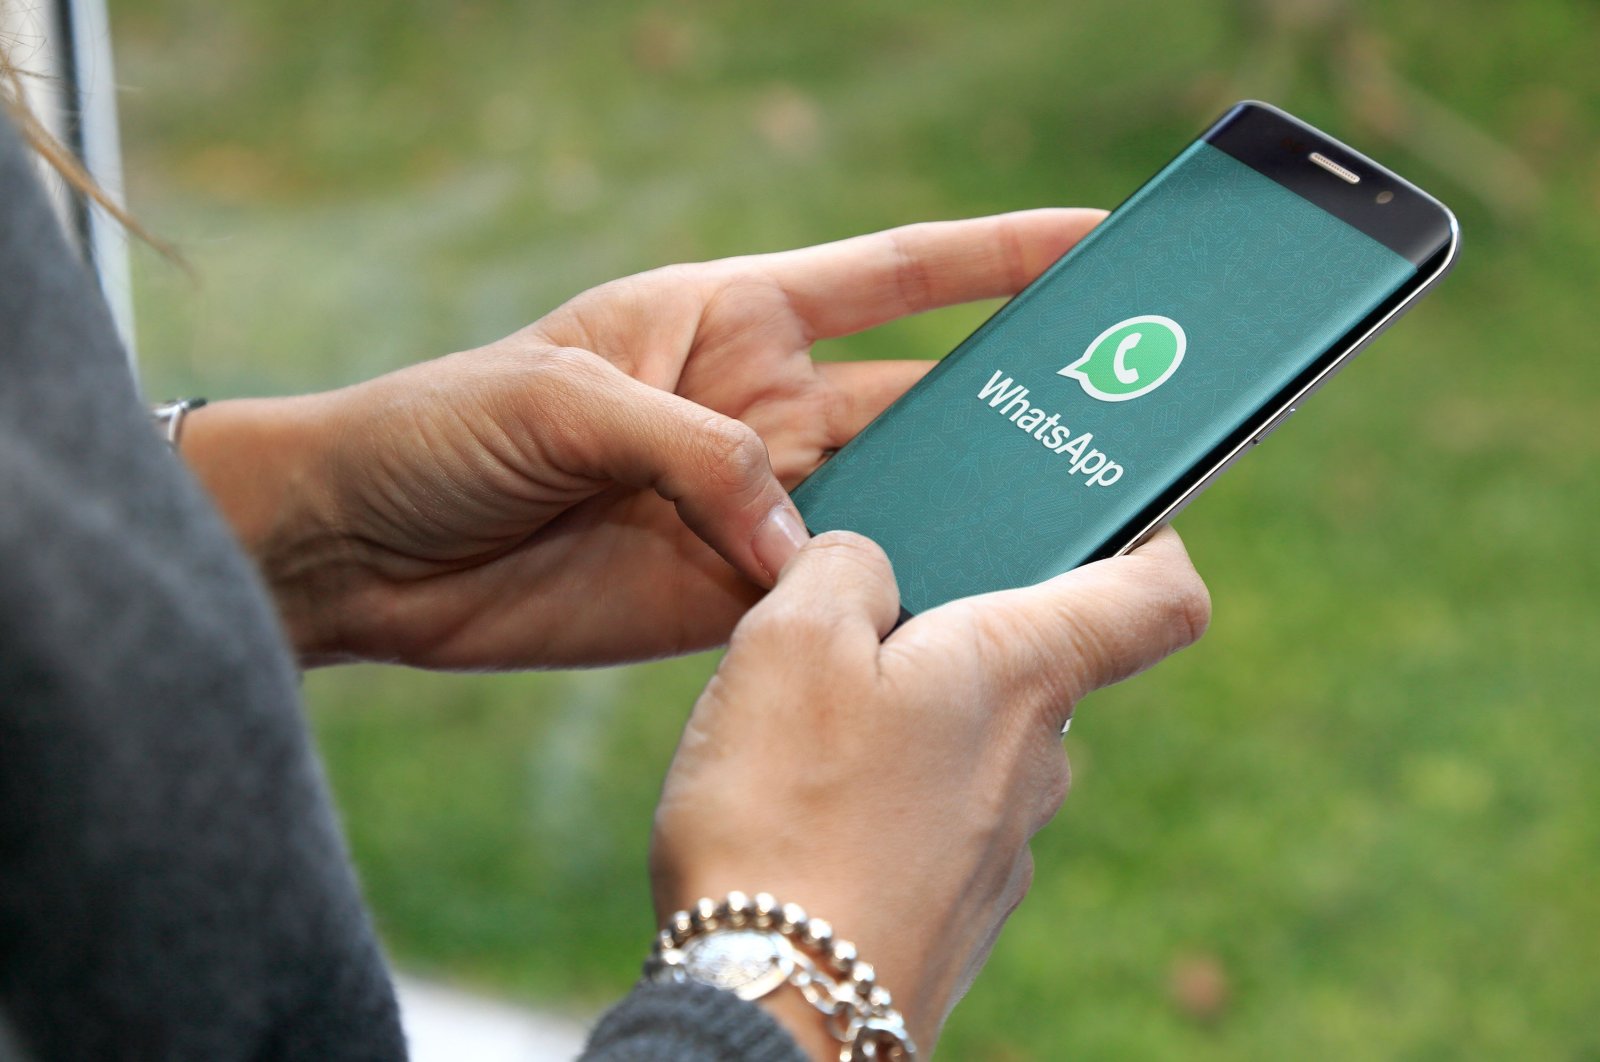 WhatsApp is warning users in a pop-up notice that they need to accept the new updates to continue using WhatsApp or delete their accounts. (Shutterstock Photo)